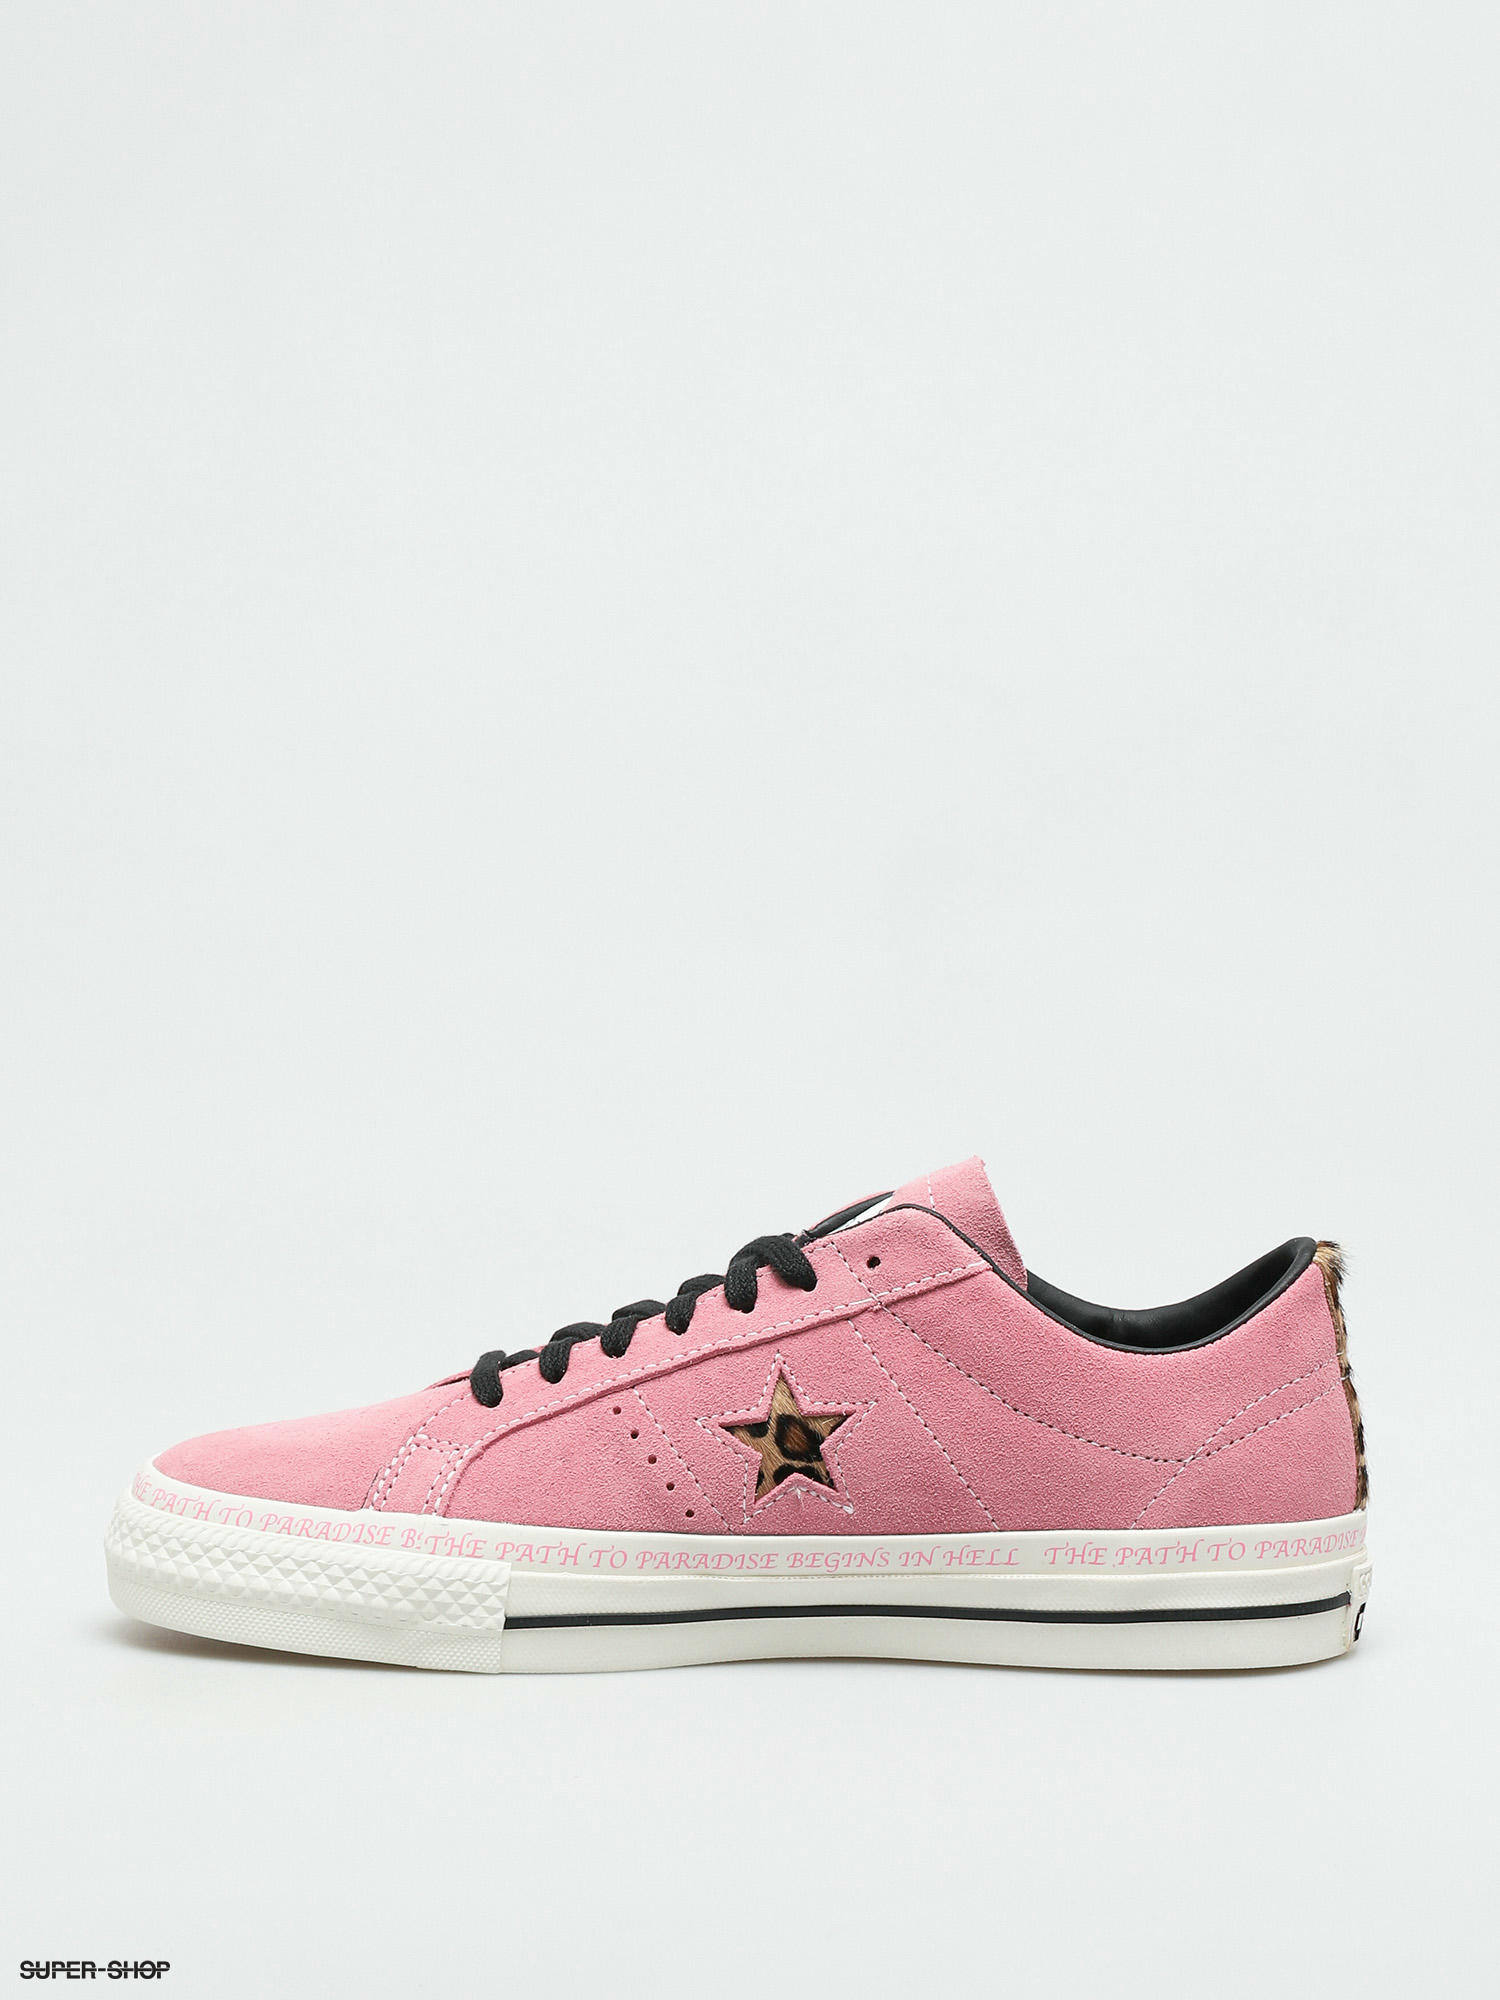 converse with one star